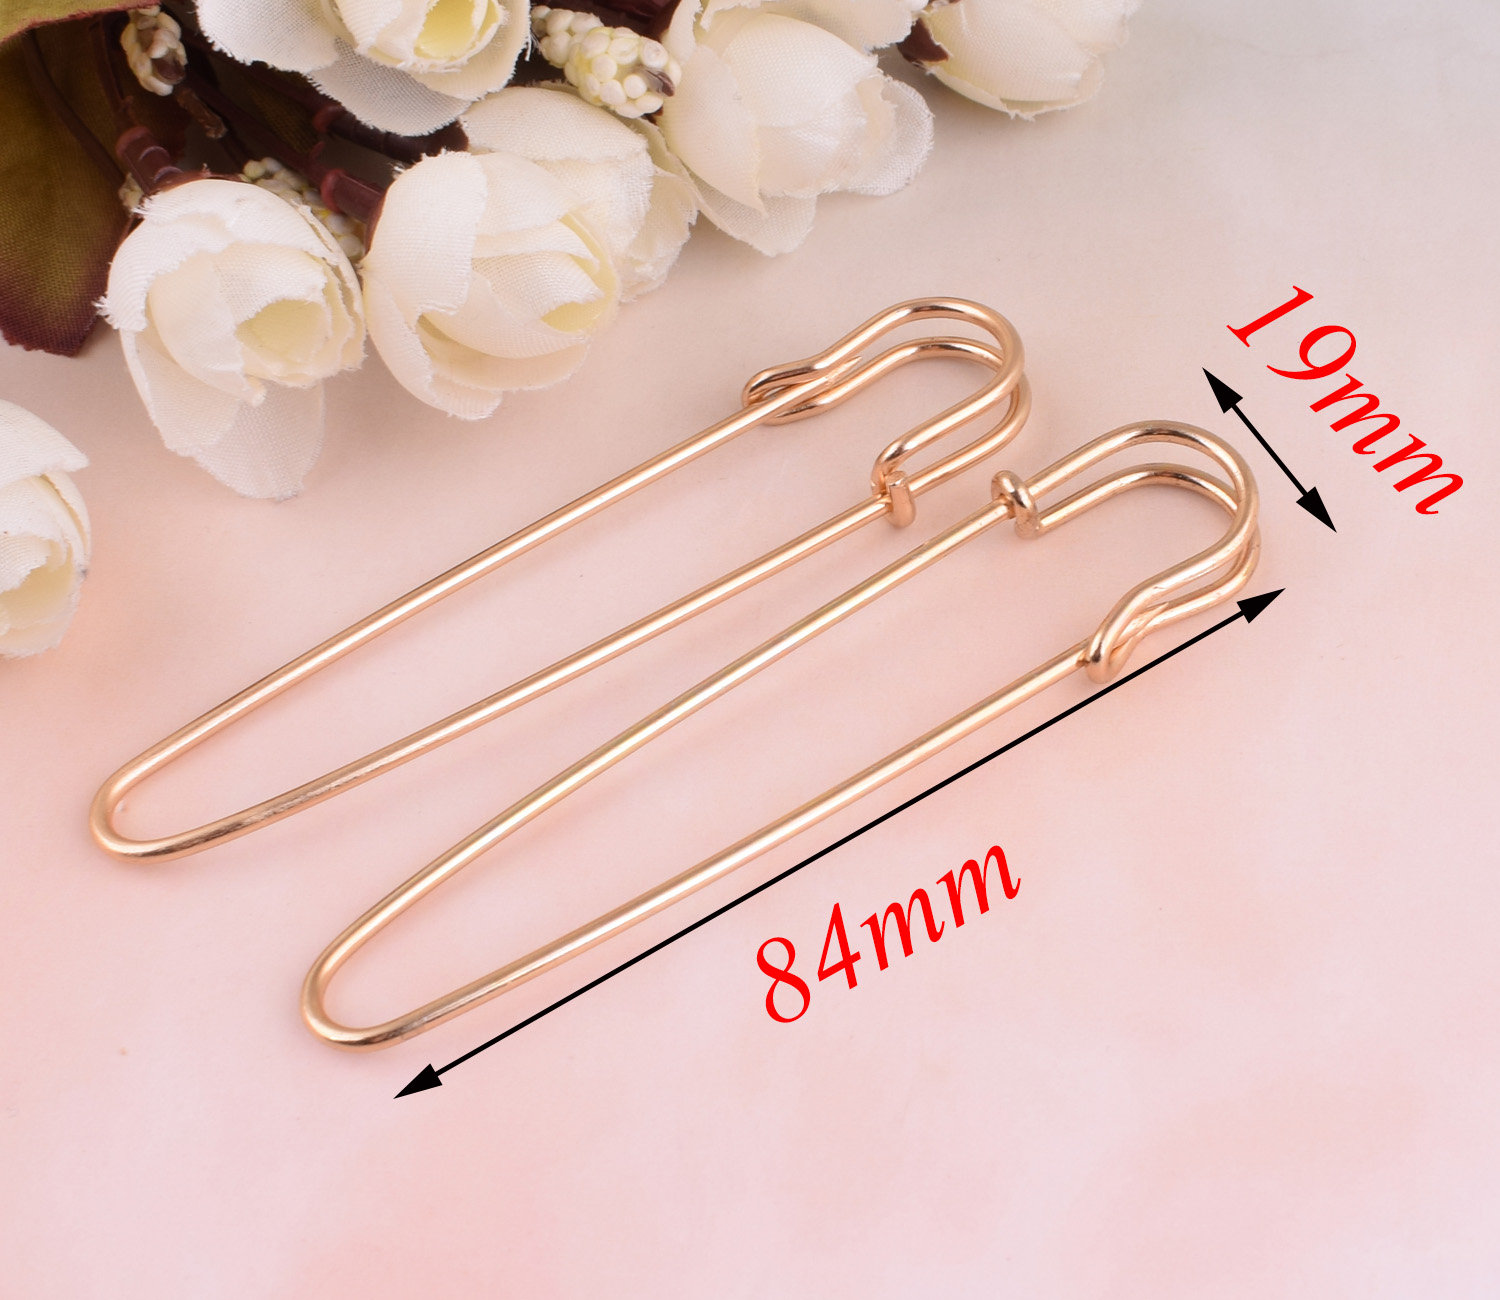 40 Pcs Rose Gold/gold Safety Pins,21mm Craft Silver Safety Pin Brooch  Stitch Markers,metal Safety Pins Loops Charms Jewelry Tag Fasteners 